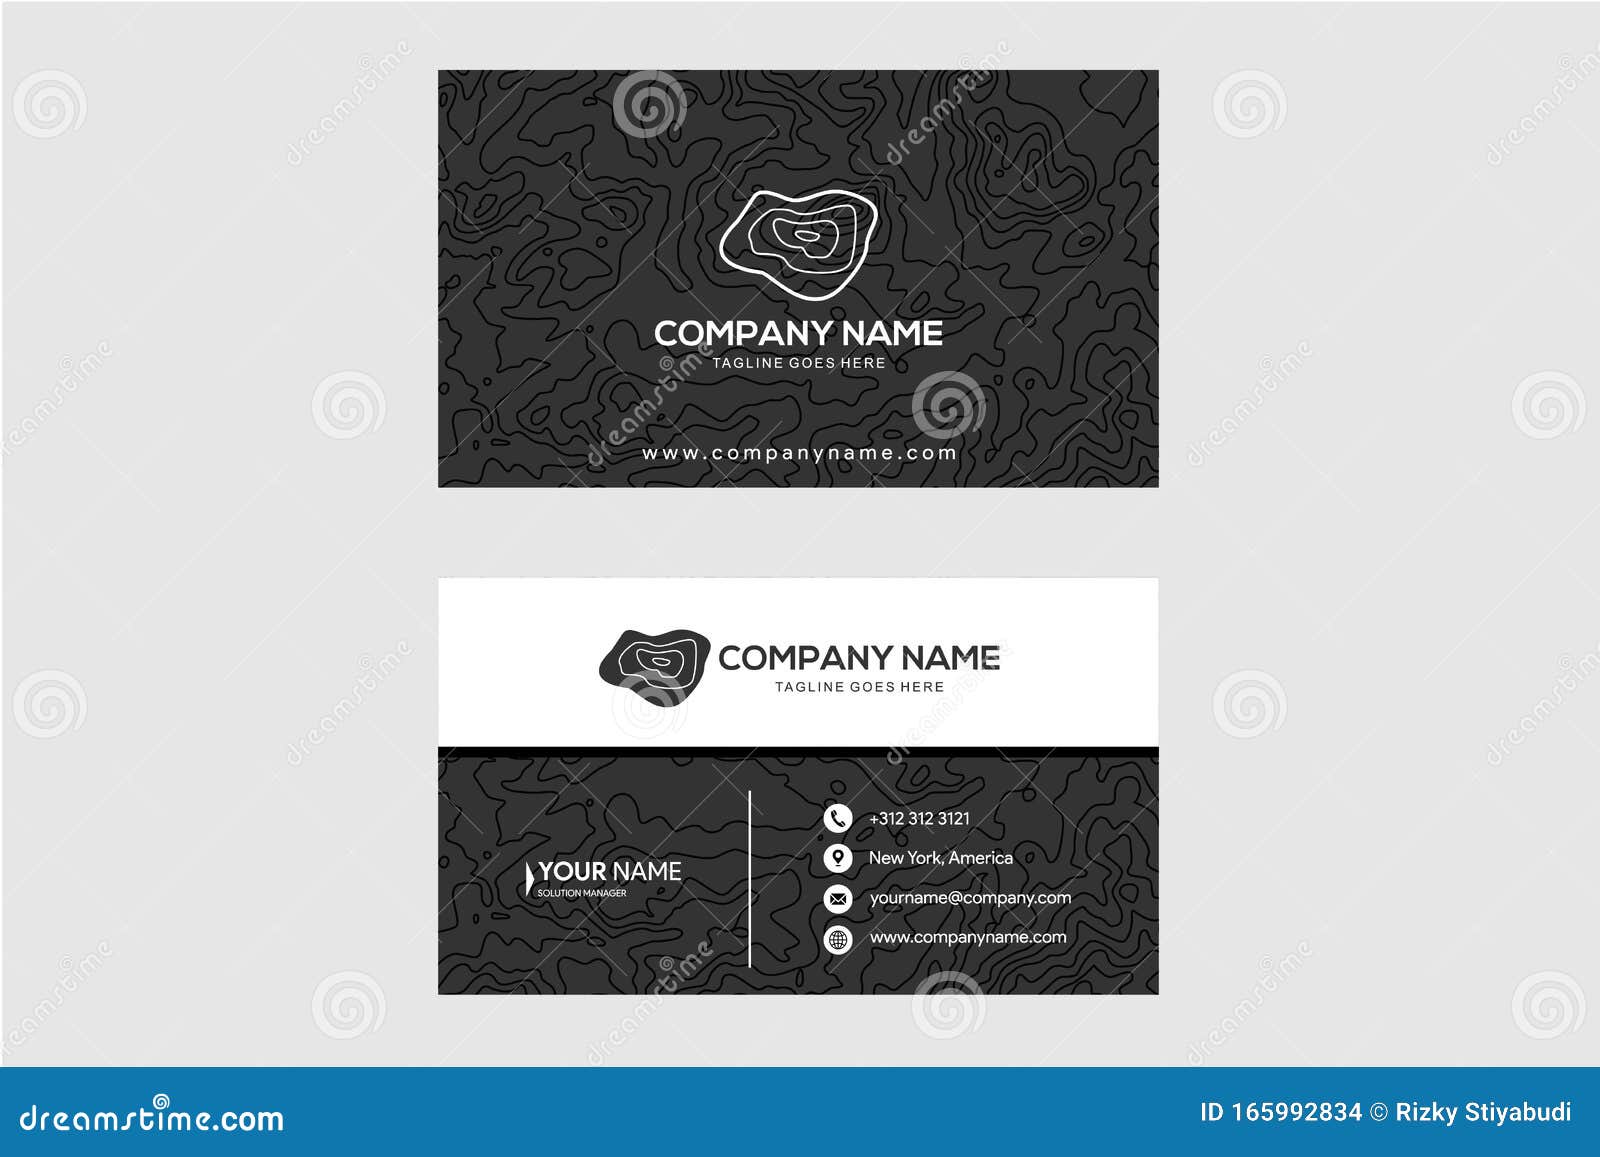 Basic Business Card Template from thumbs.dreamstime.com